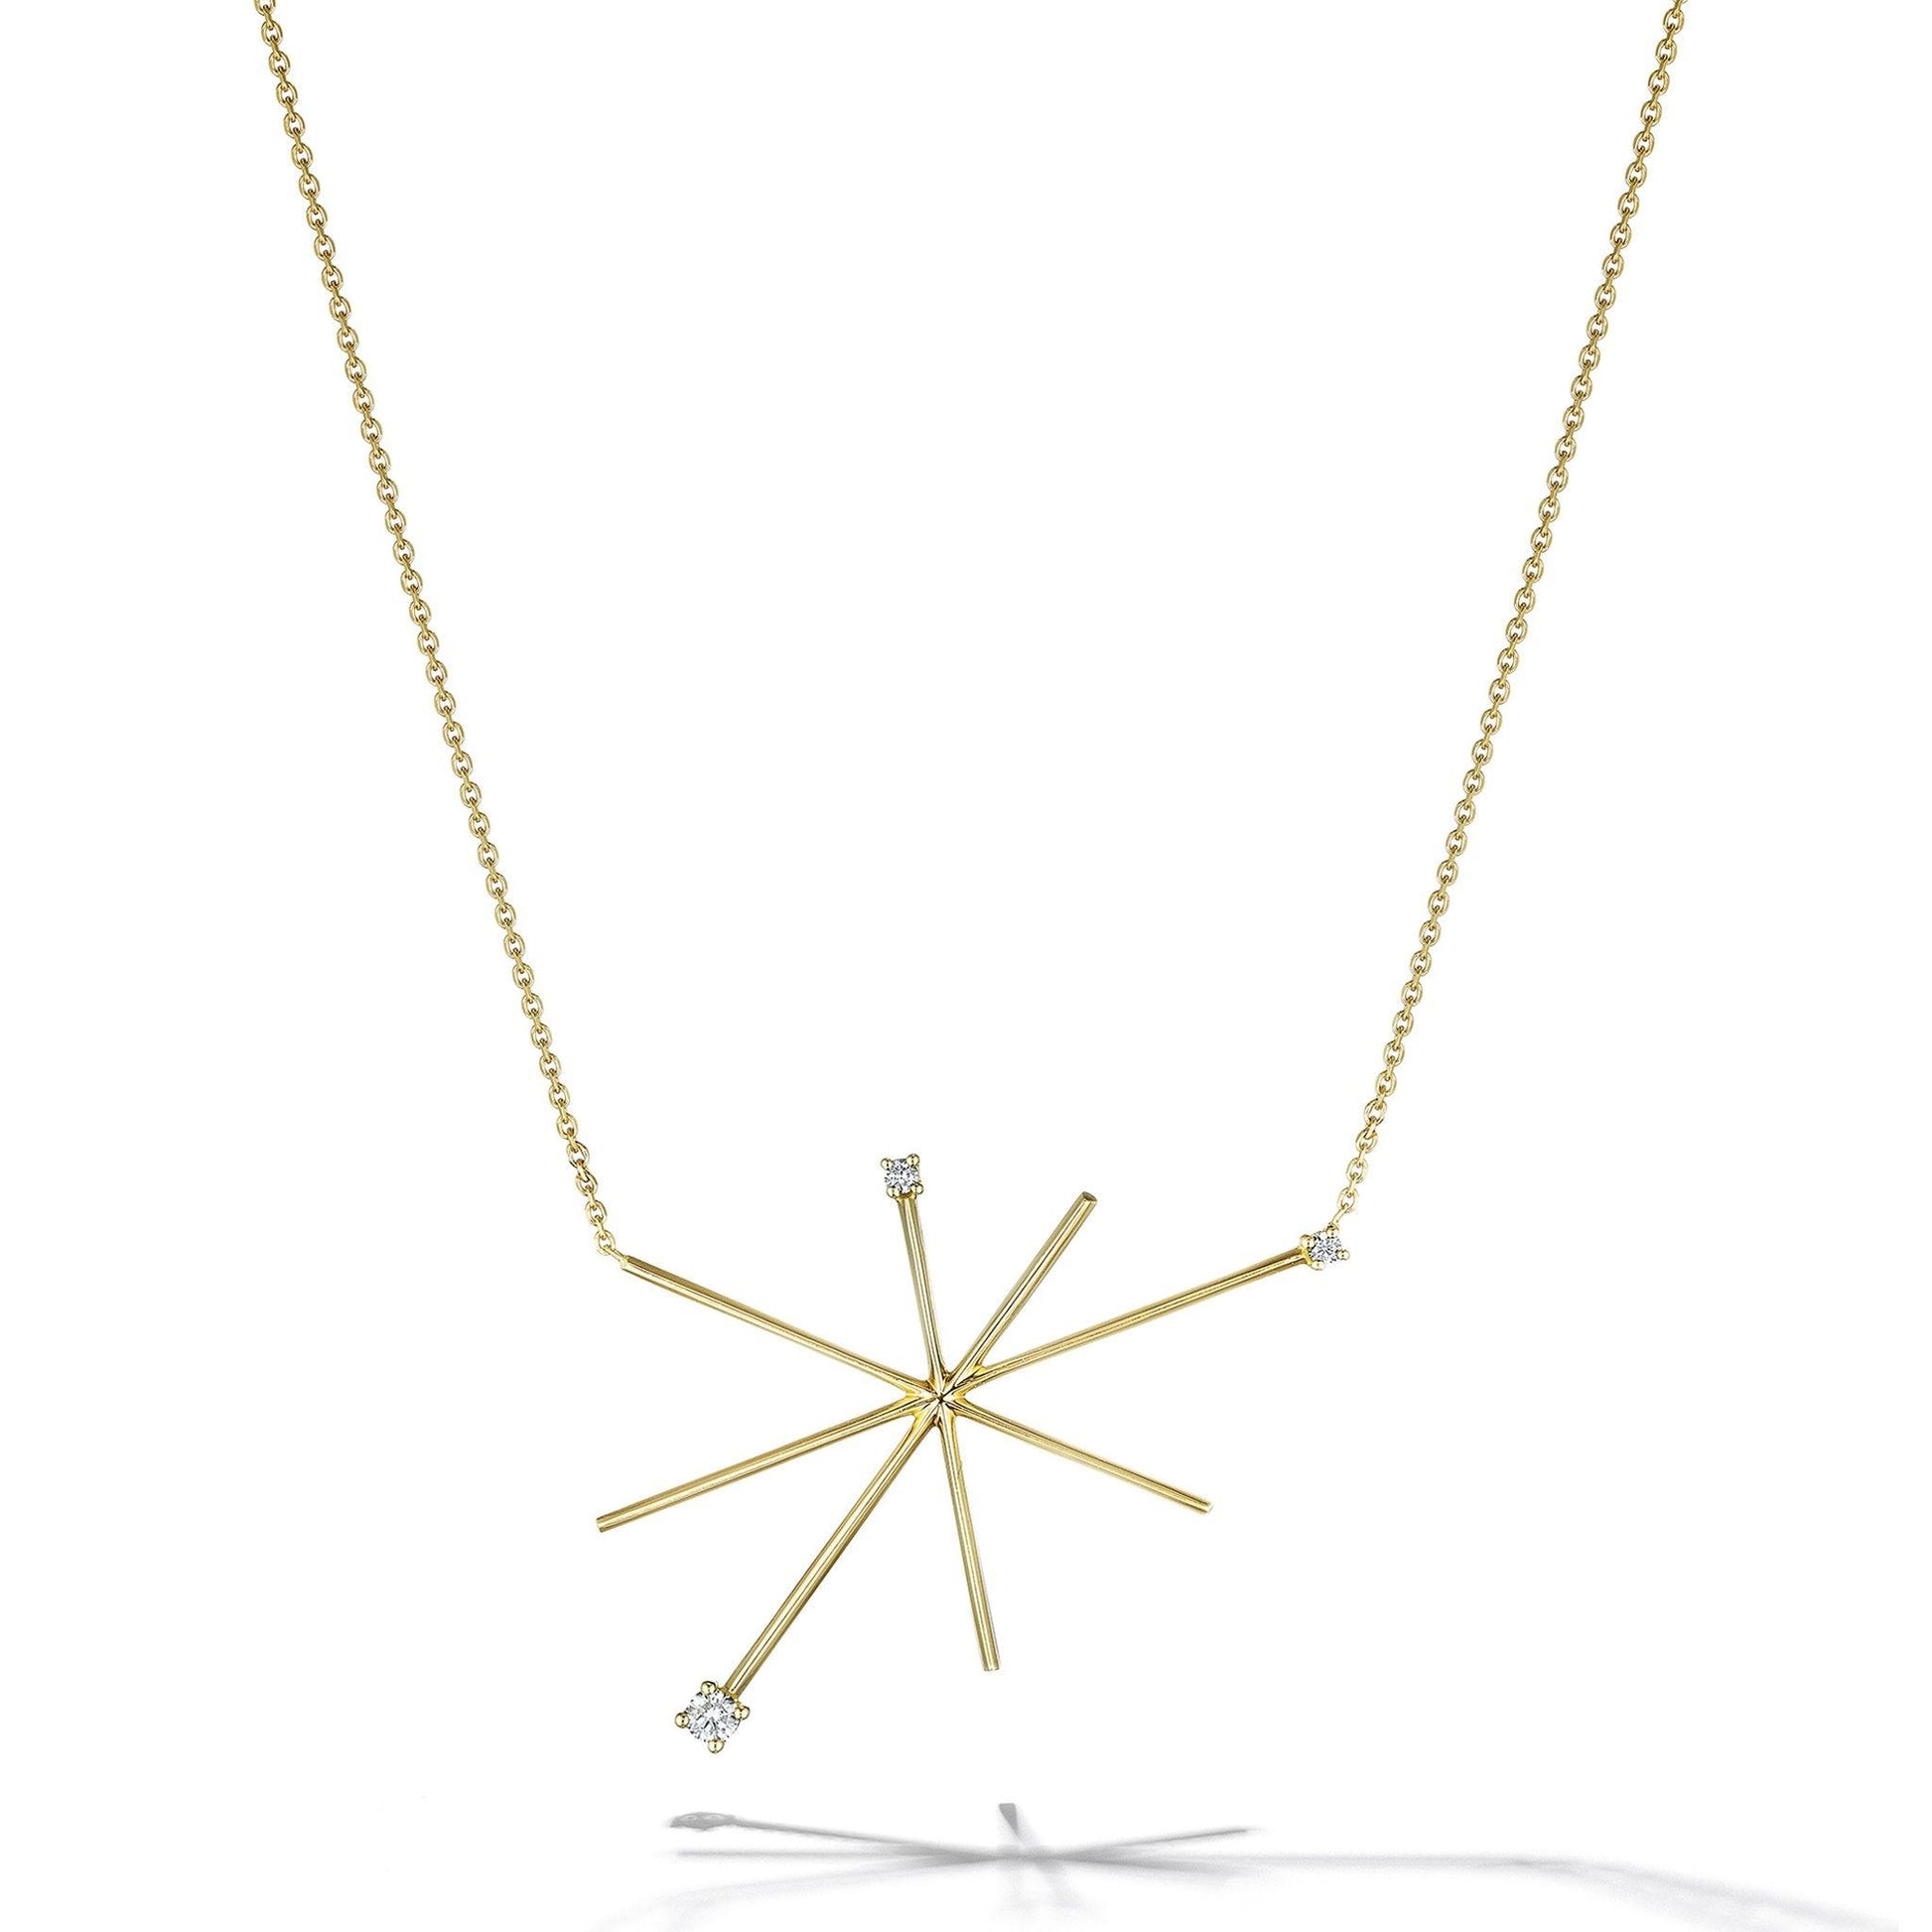 Mimi-So-Piece-Star-Necklace-Large_18k Yellow Gold